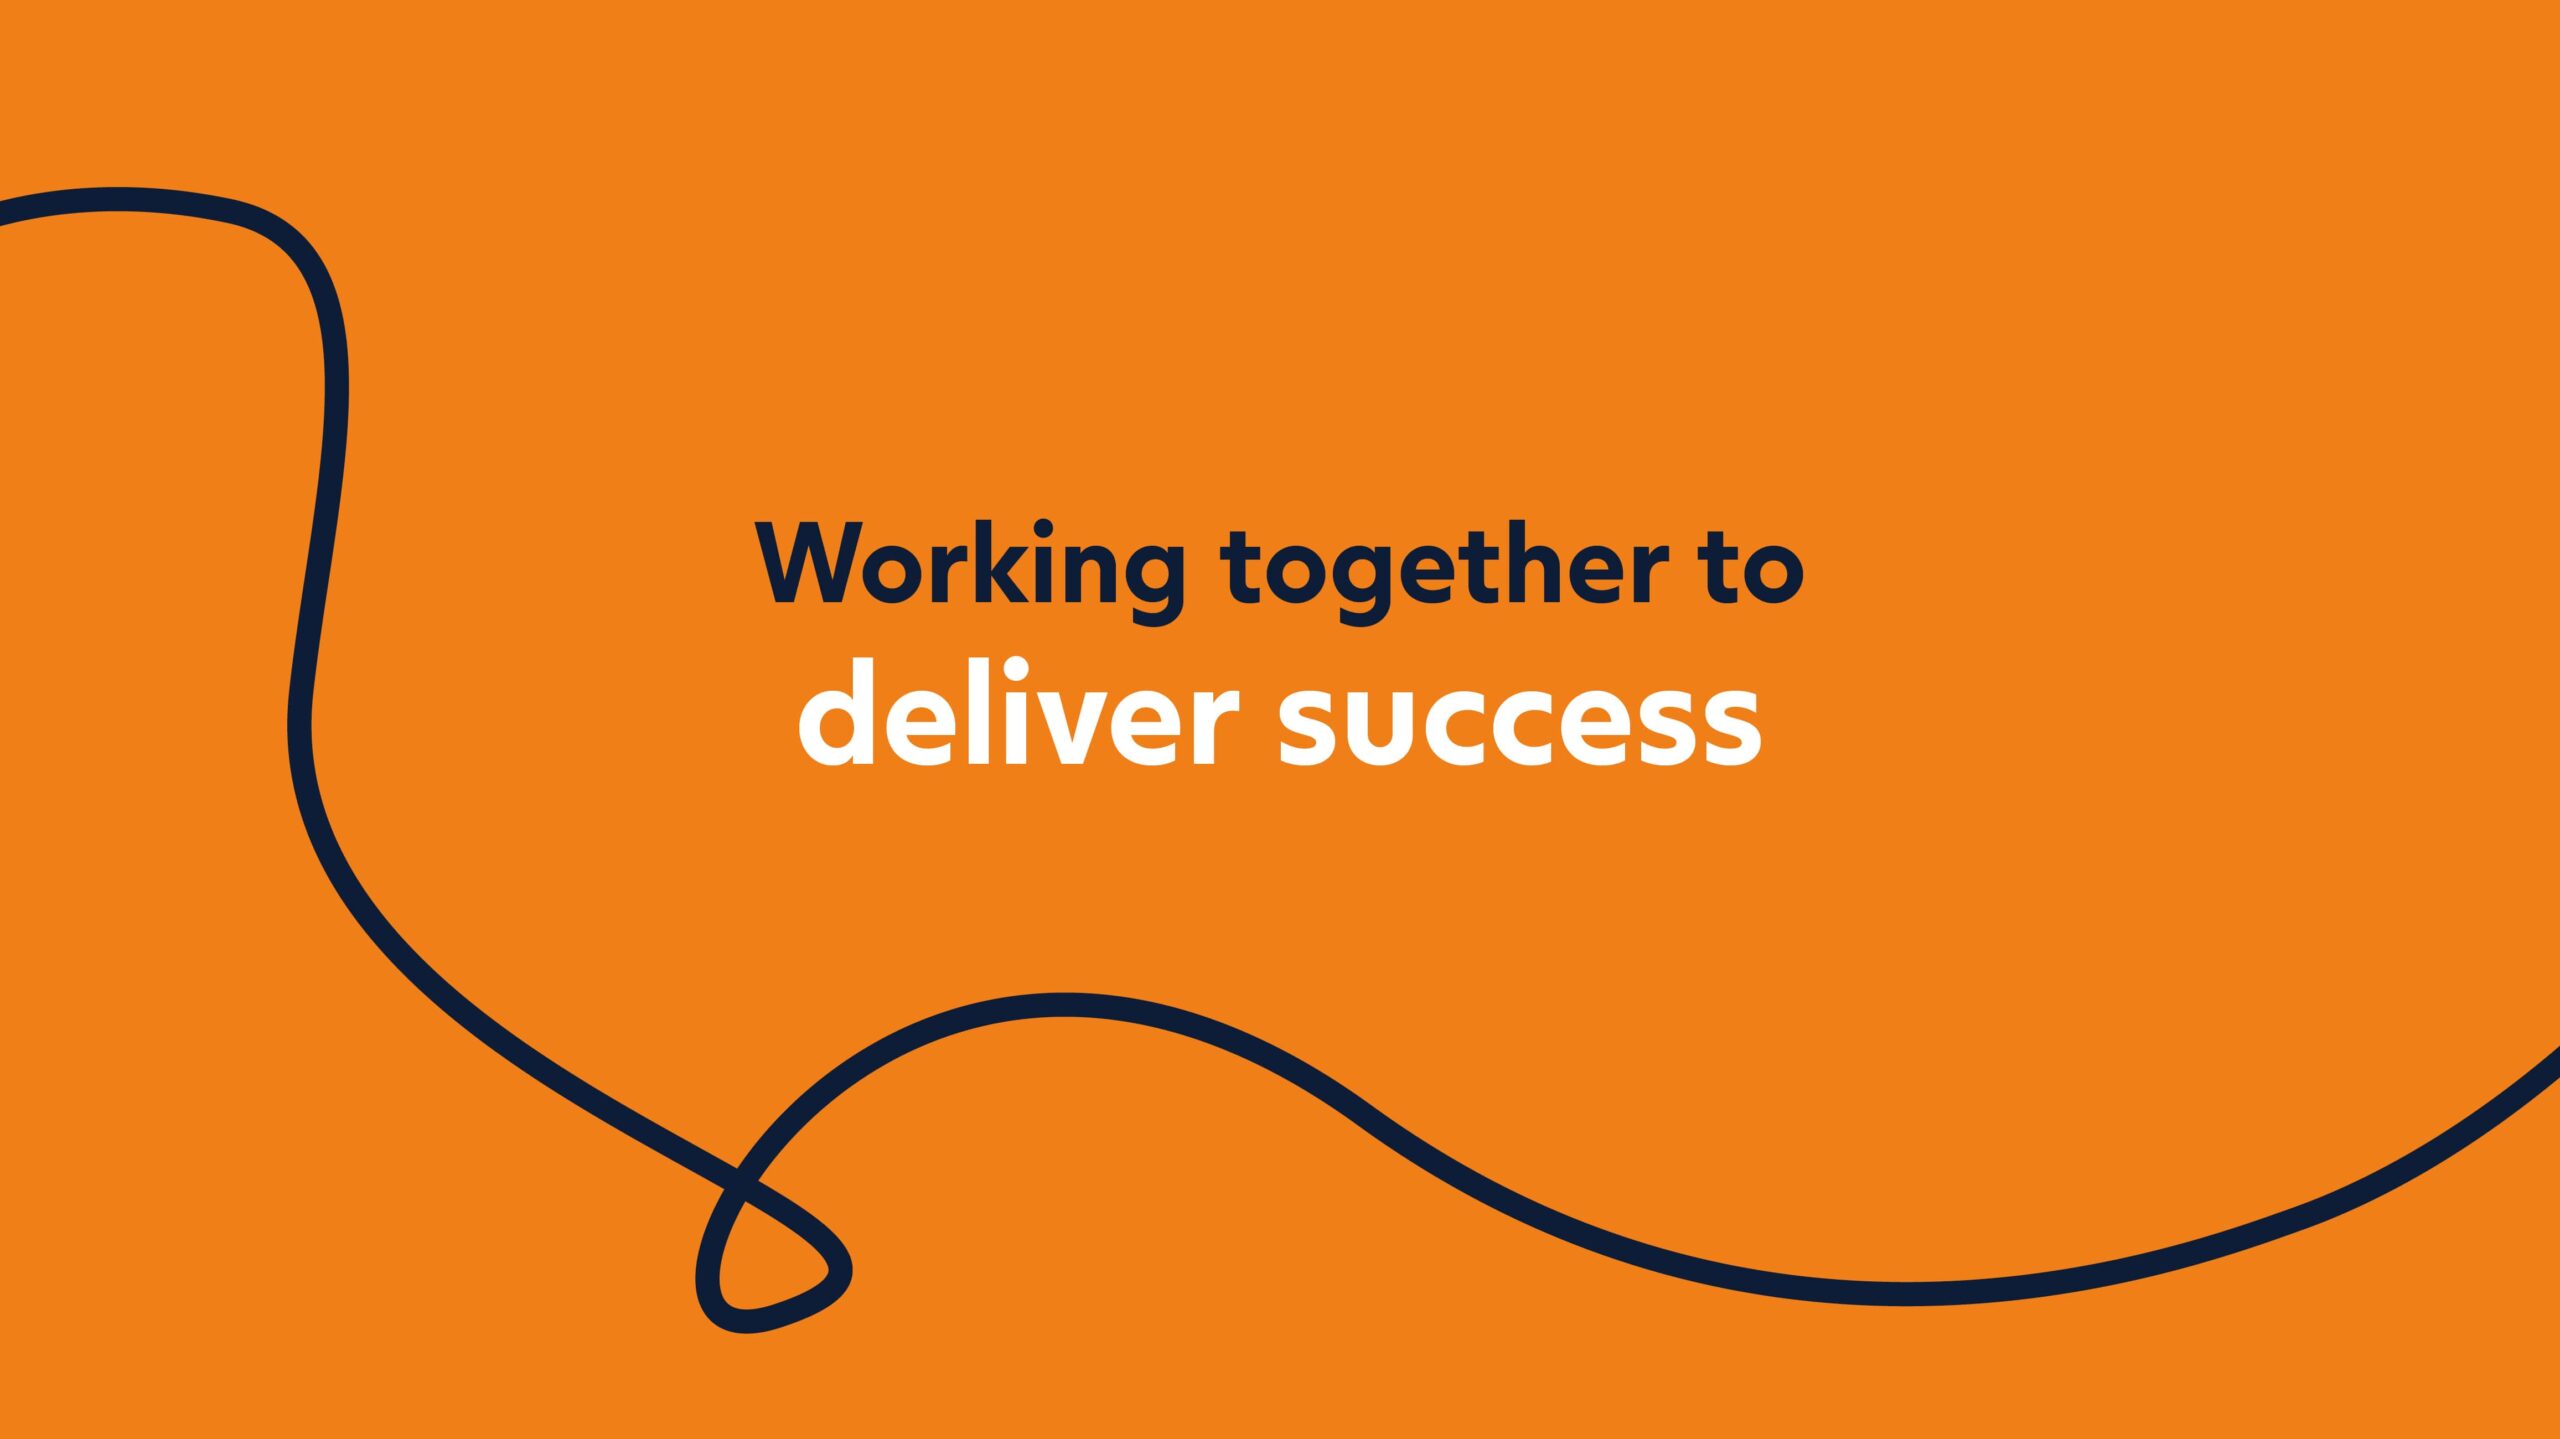 A curving black line on an orange background, with the words "working together to deliver success" placed above.